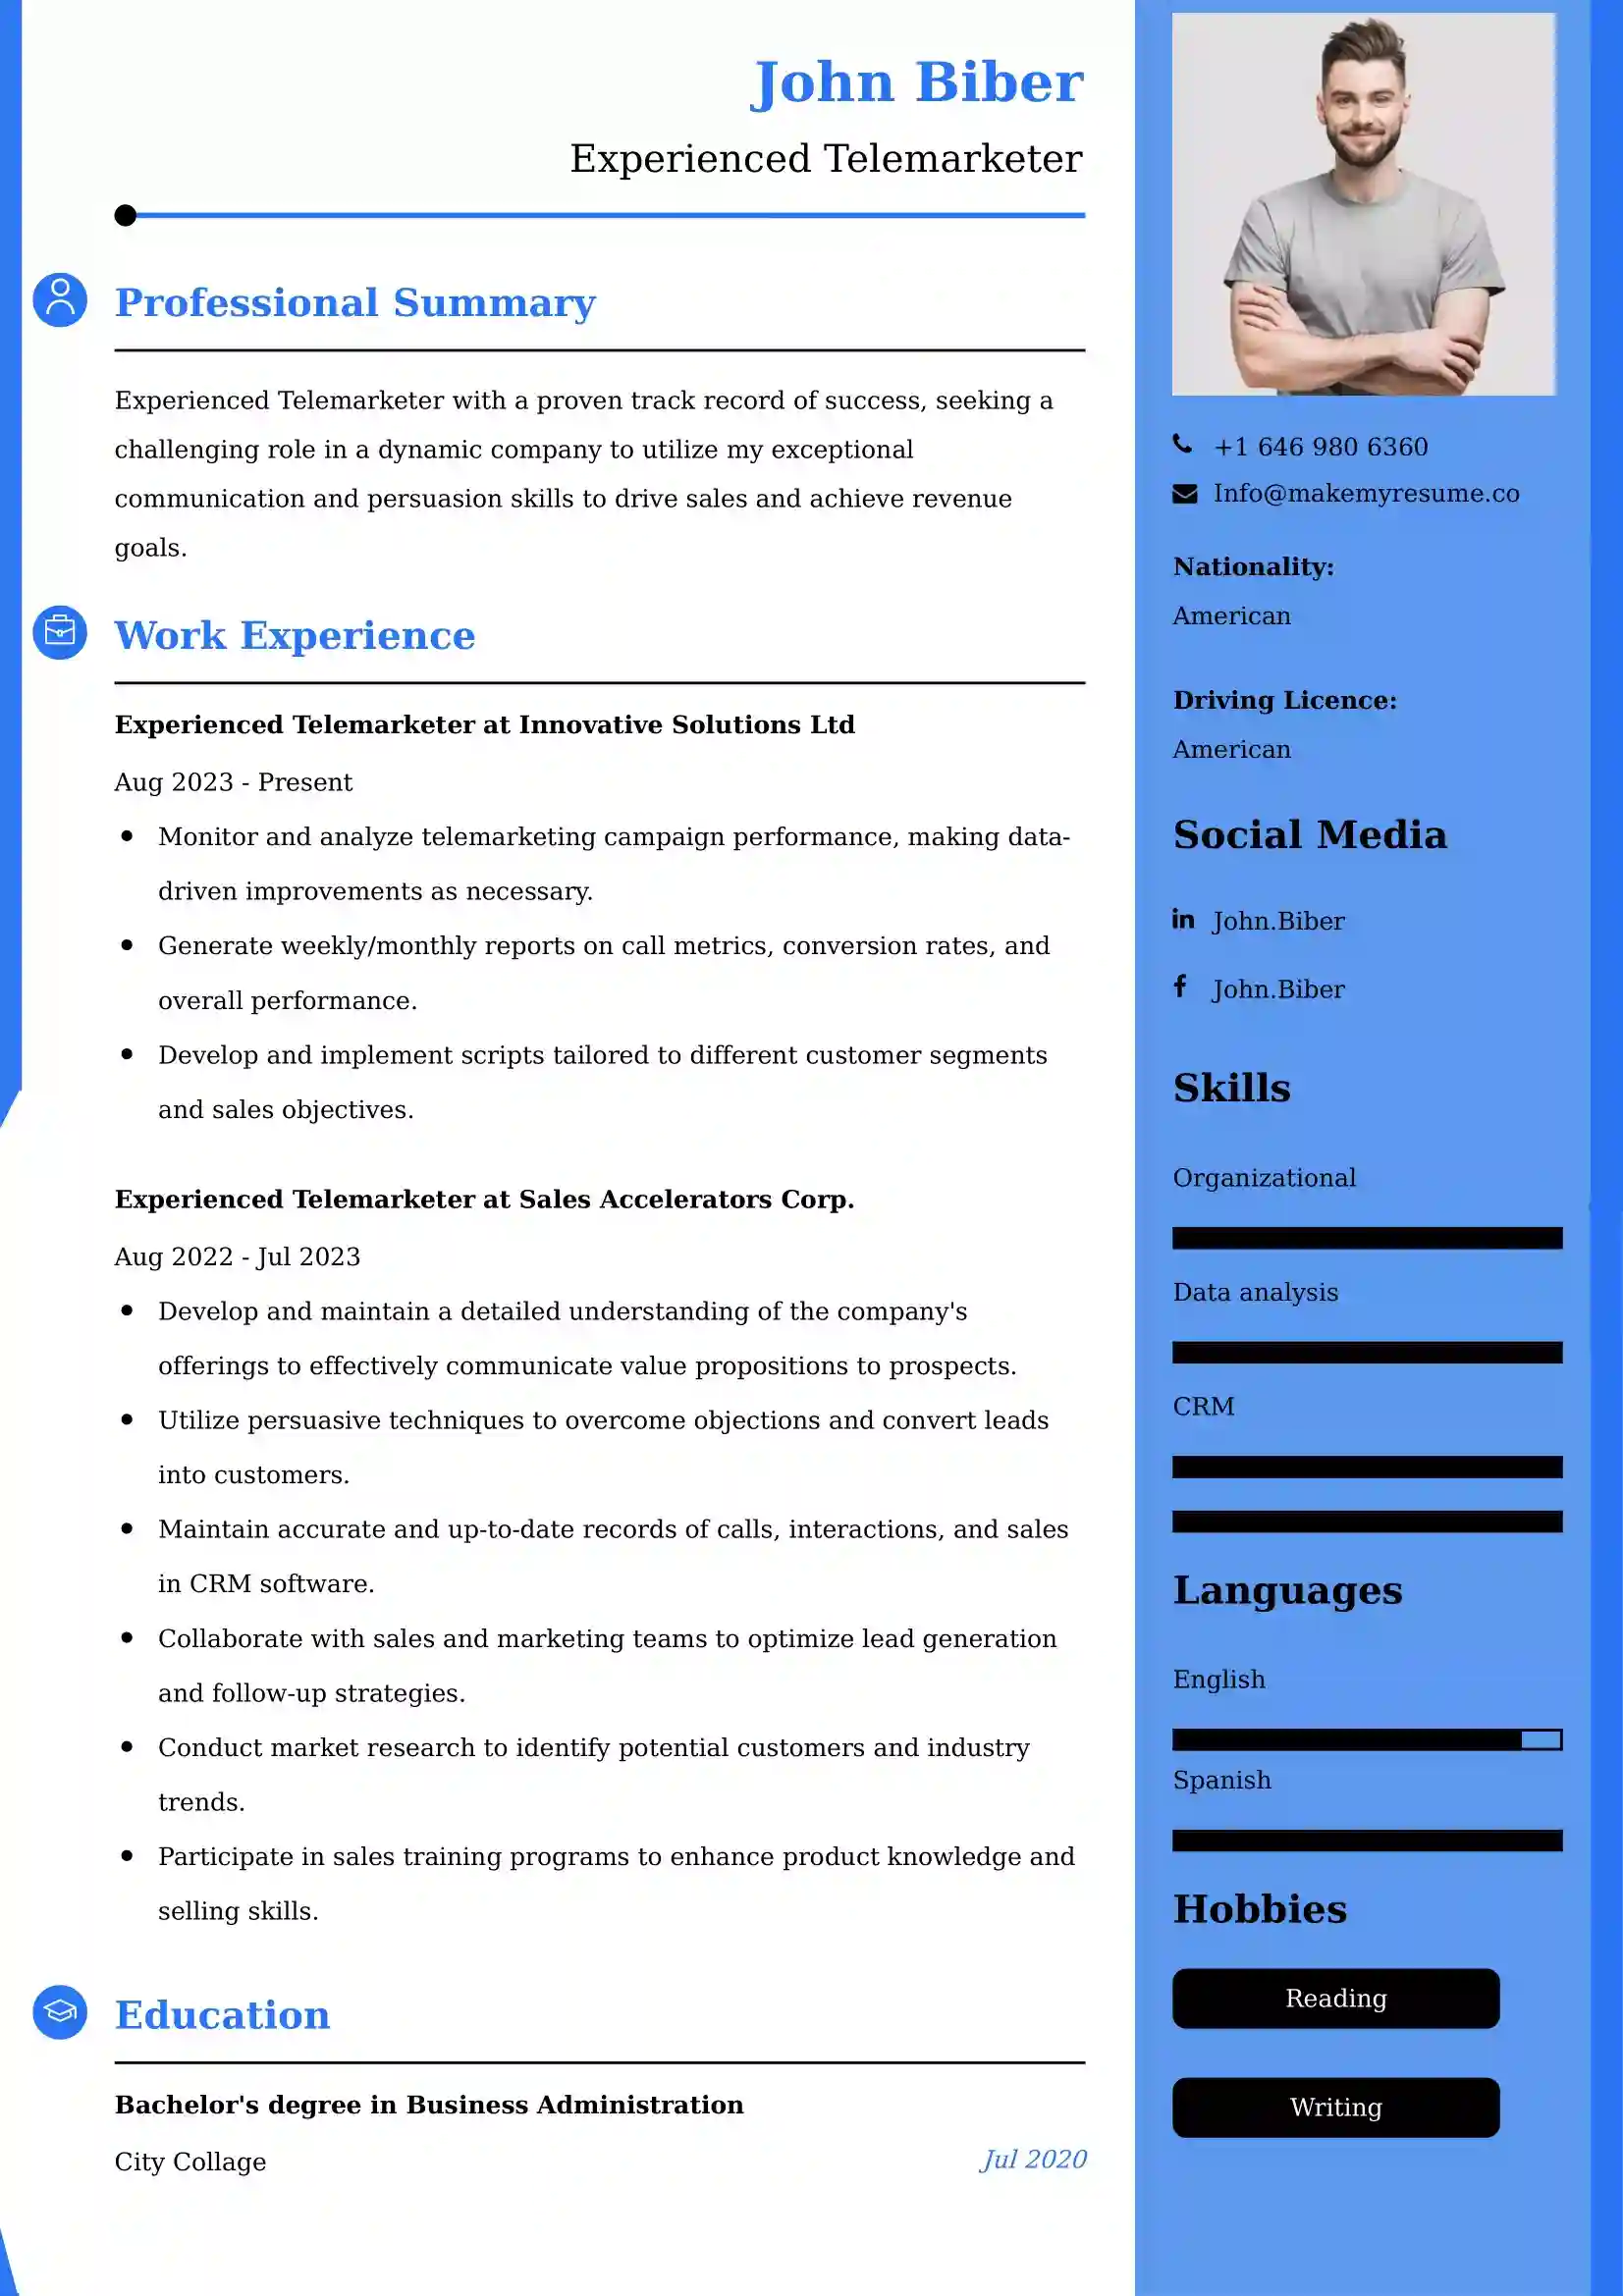 Best Experienced Telemarketer Resume Examples for UAE